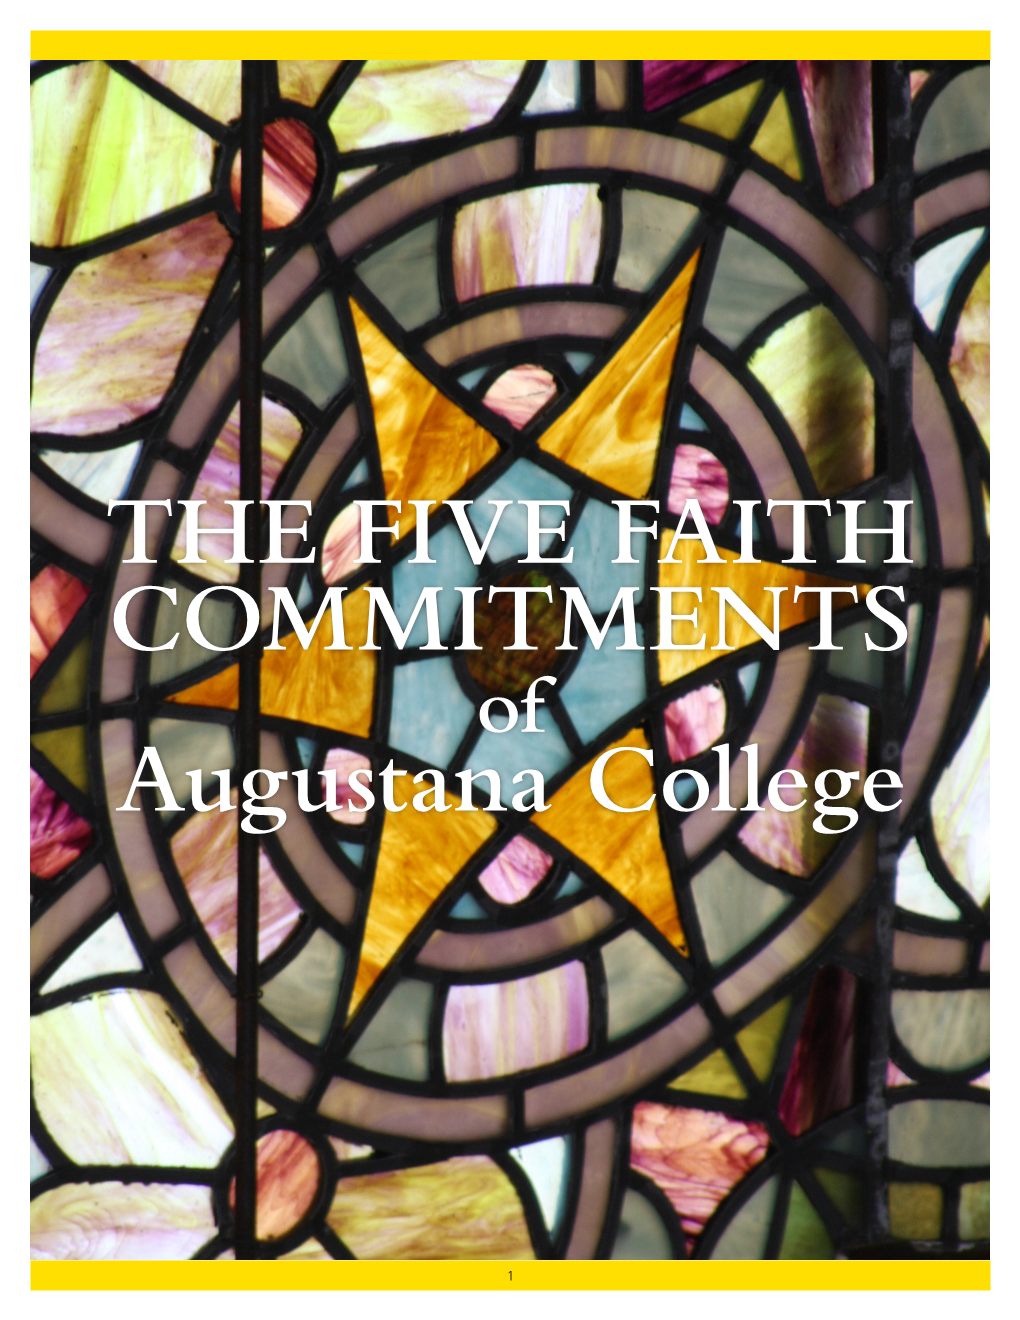 THE FIVE FAITH COMMITMENTS Augustana College